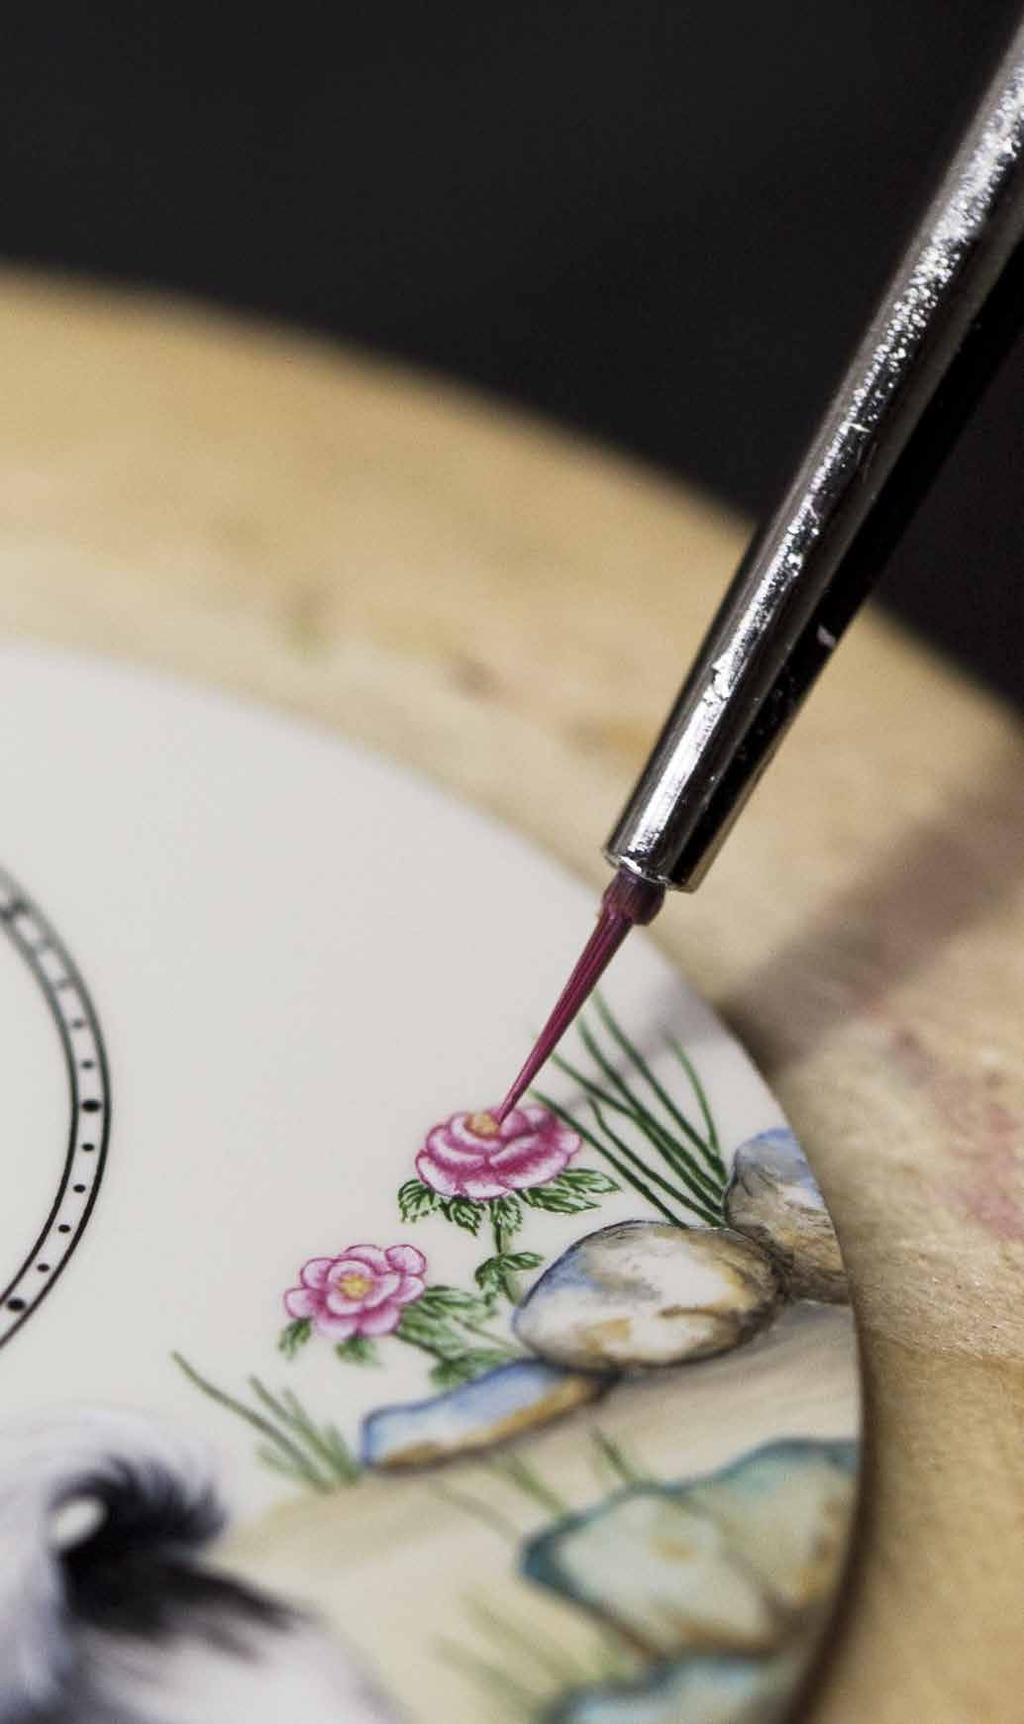 Meticulous painting of the dial of the Petite Heure Minute Dog Watch by Jaquet Droz, www.jaquet-droz.